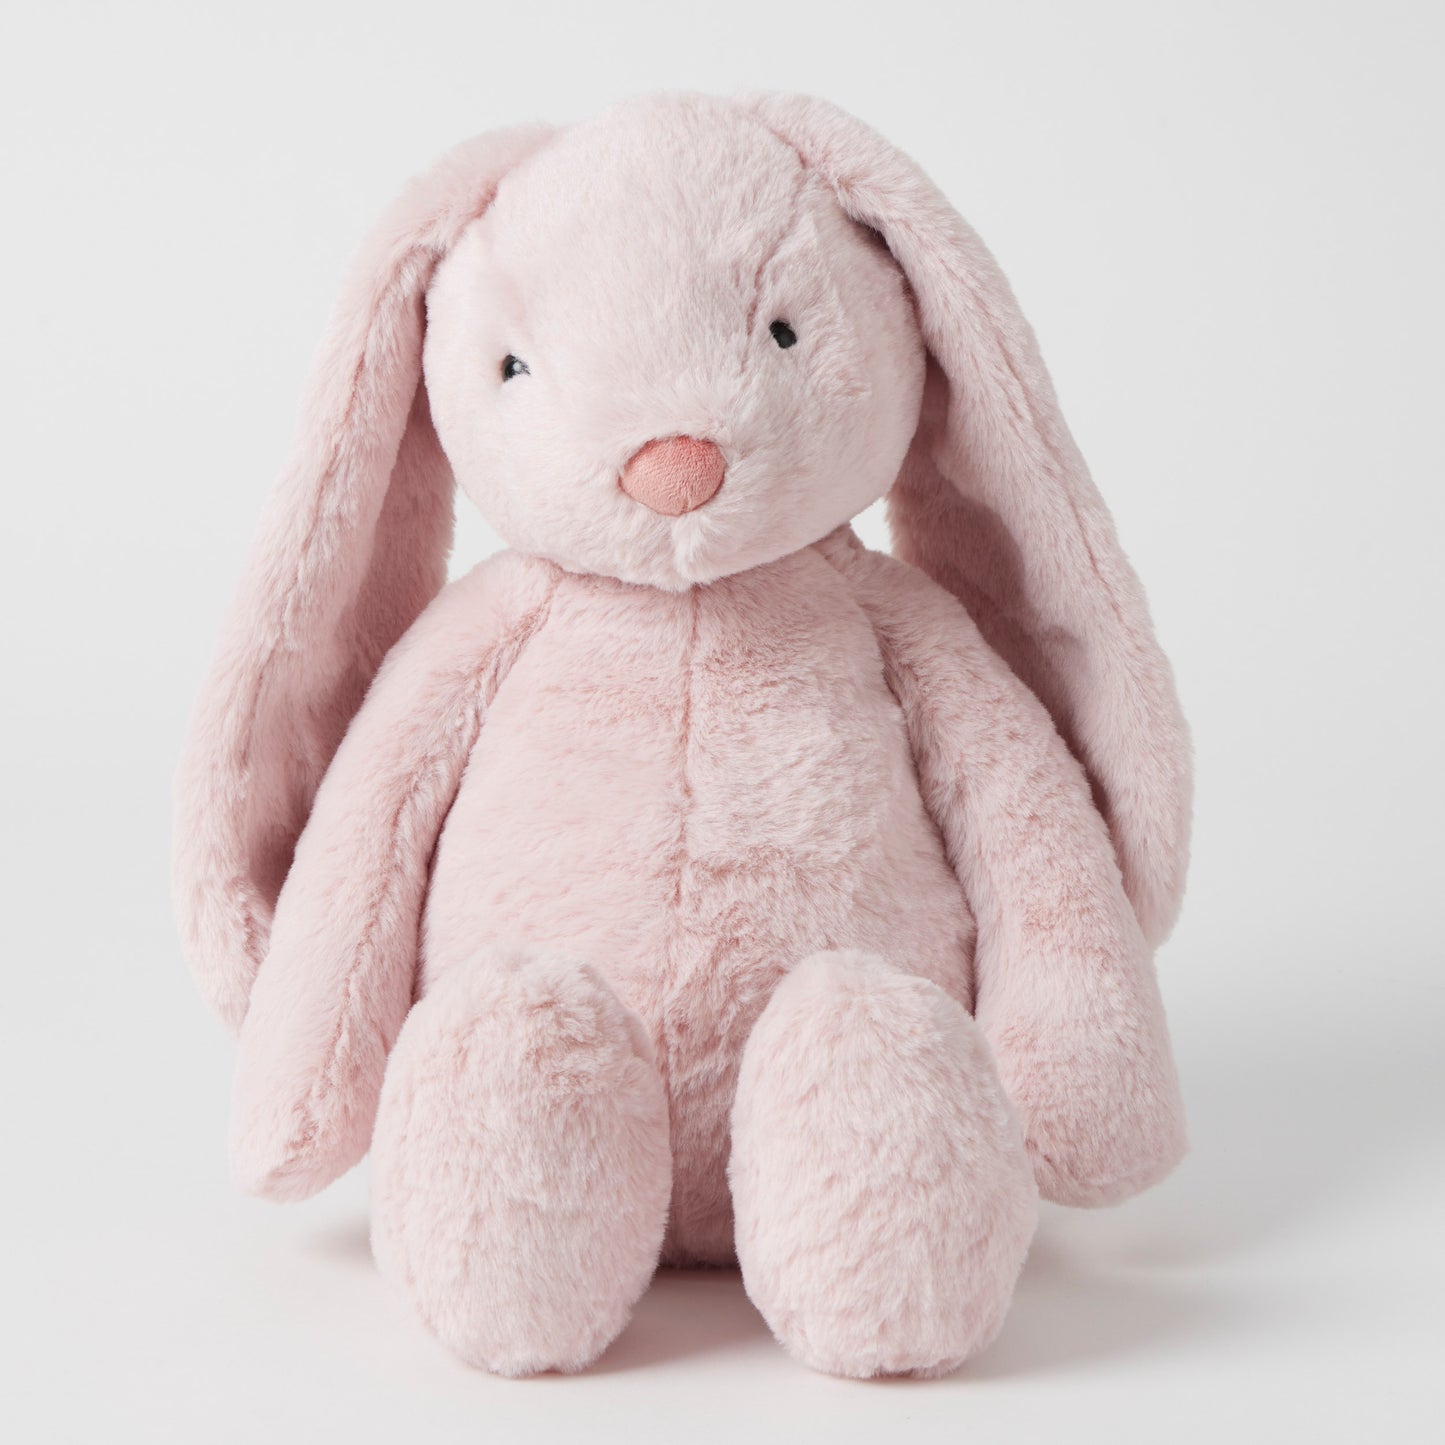 Jiggle & Giggle Bunny Collection from